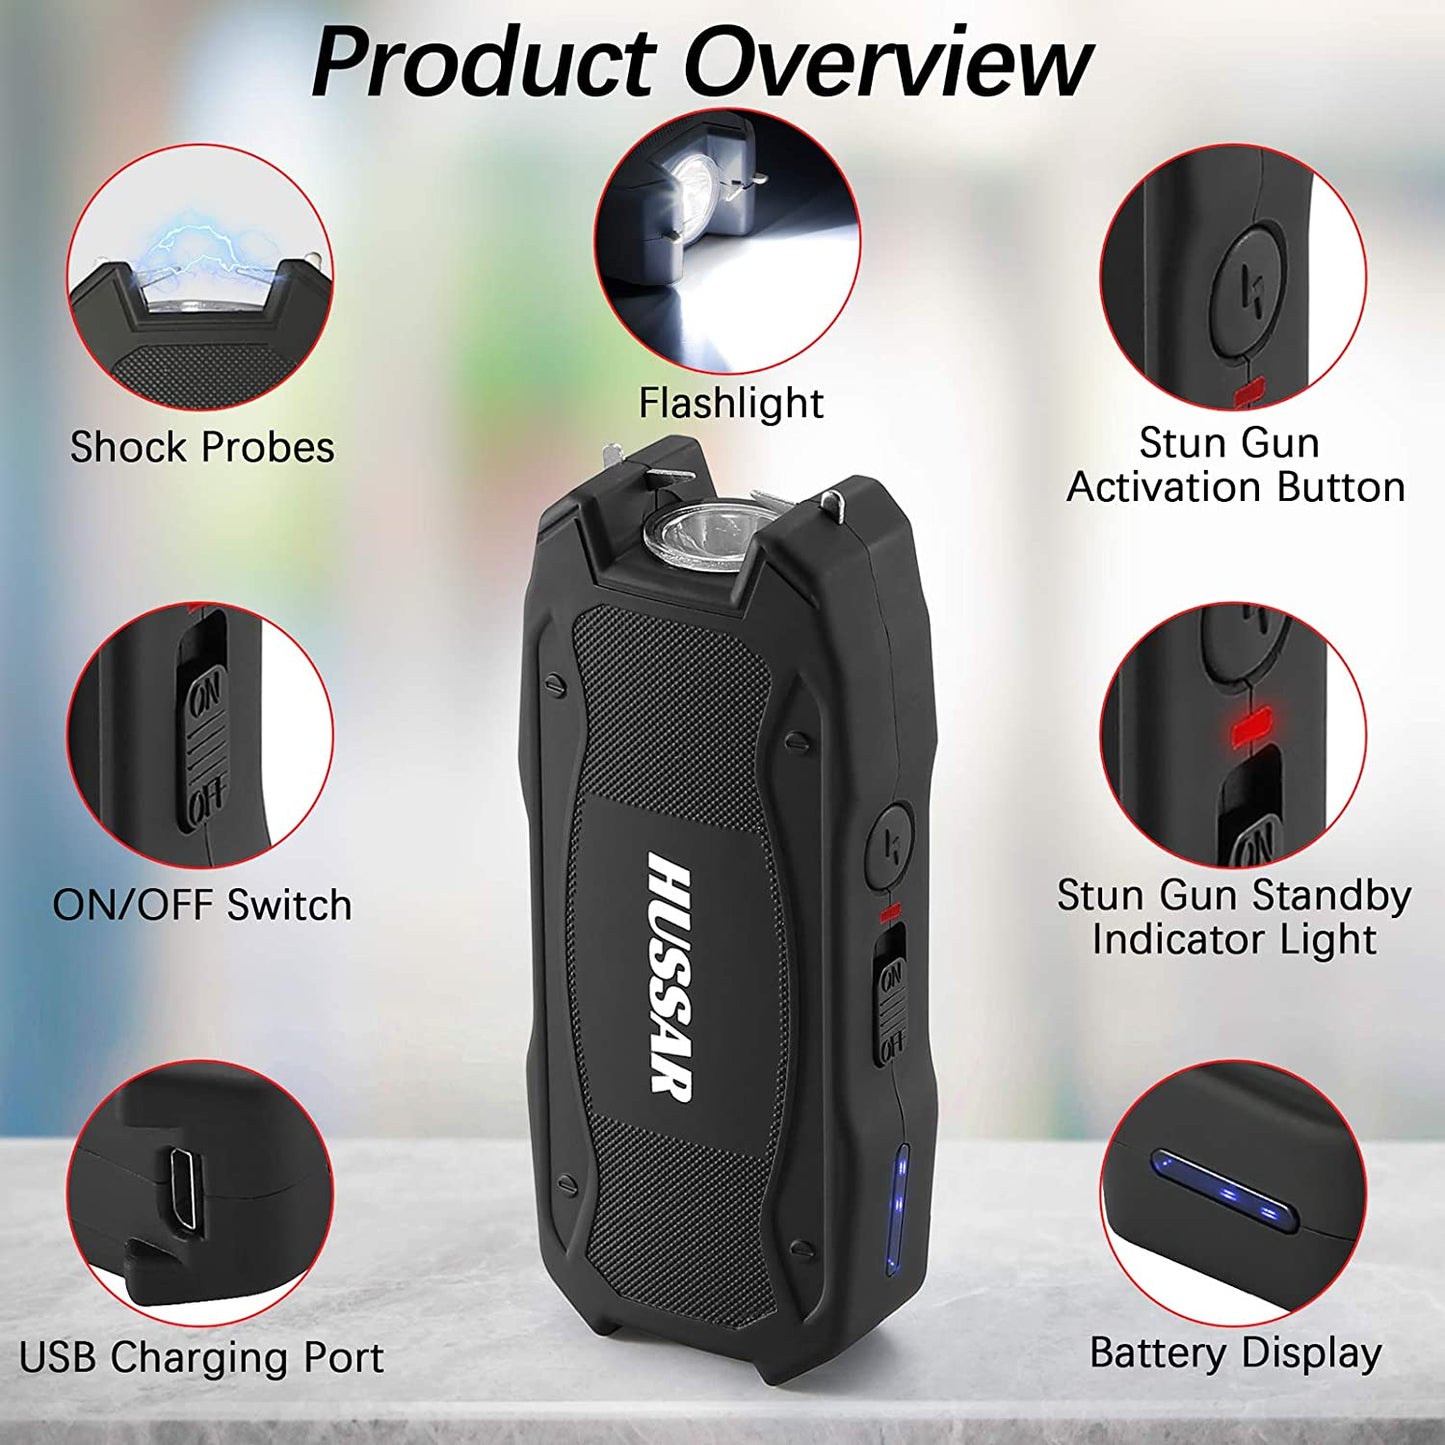 Stun Gun for Self-Defense, Rechargeable with LED Flashlight, Powerful 1.60 Μc Charge with Safety Switch, Battery Indicator and Belt Holster